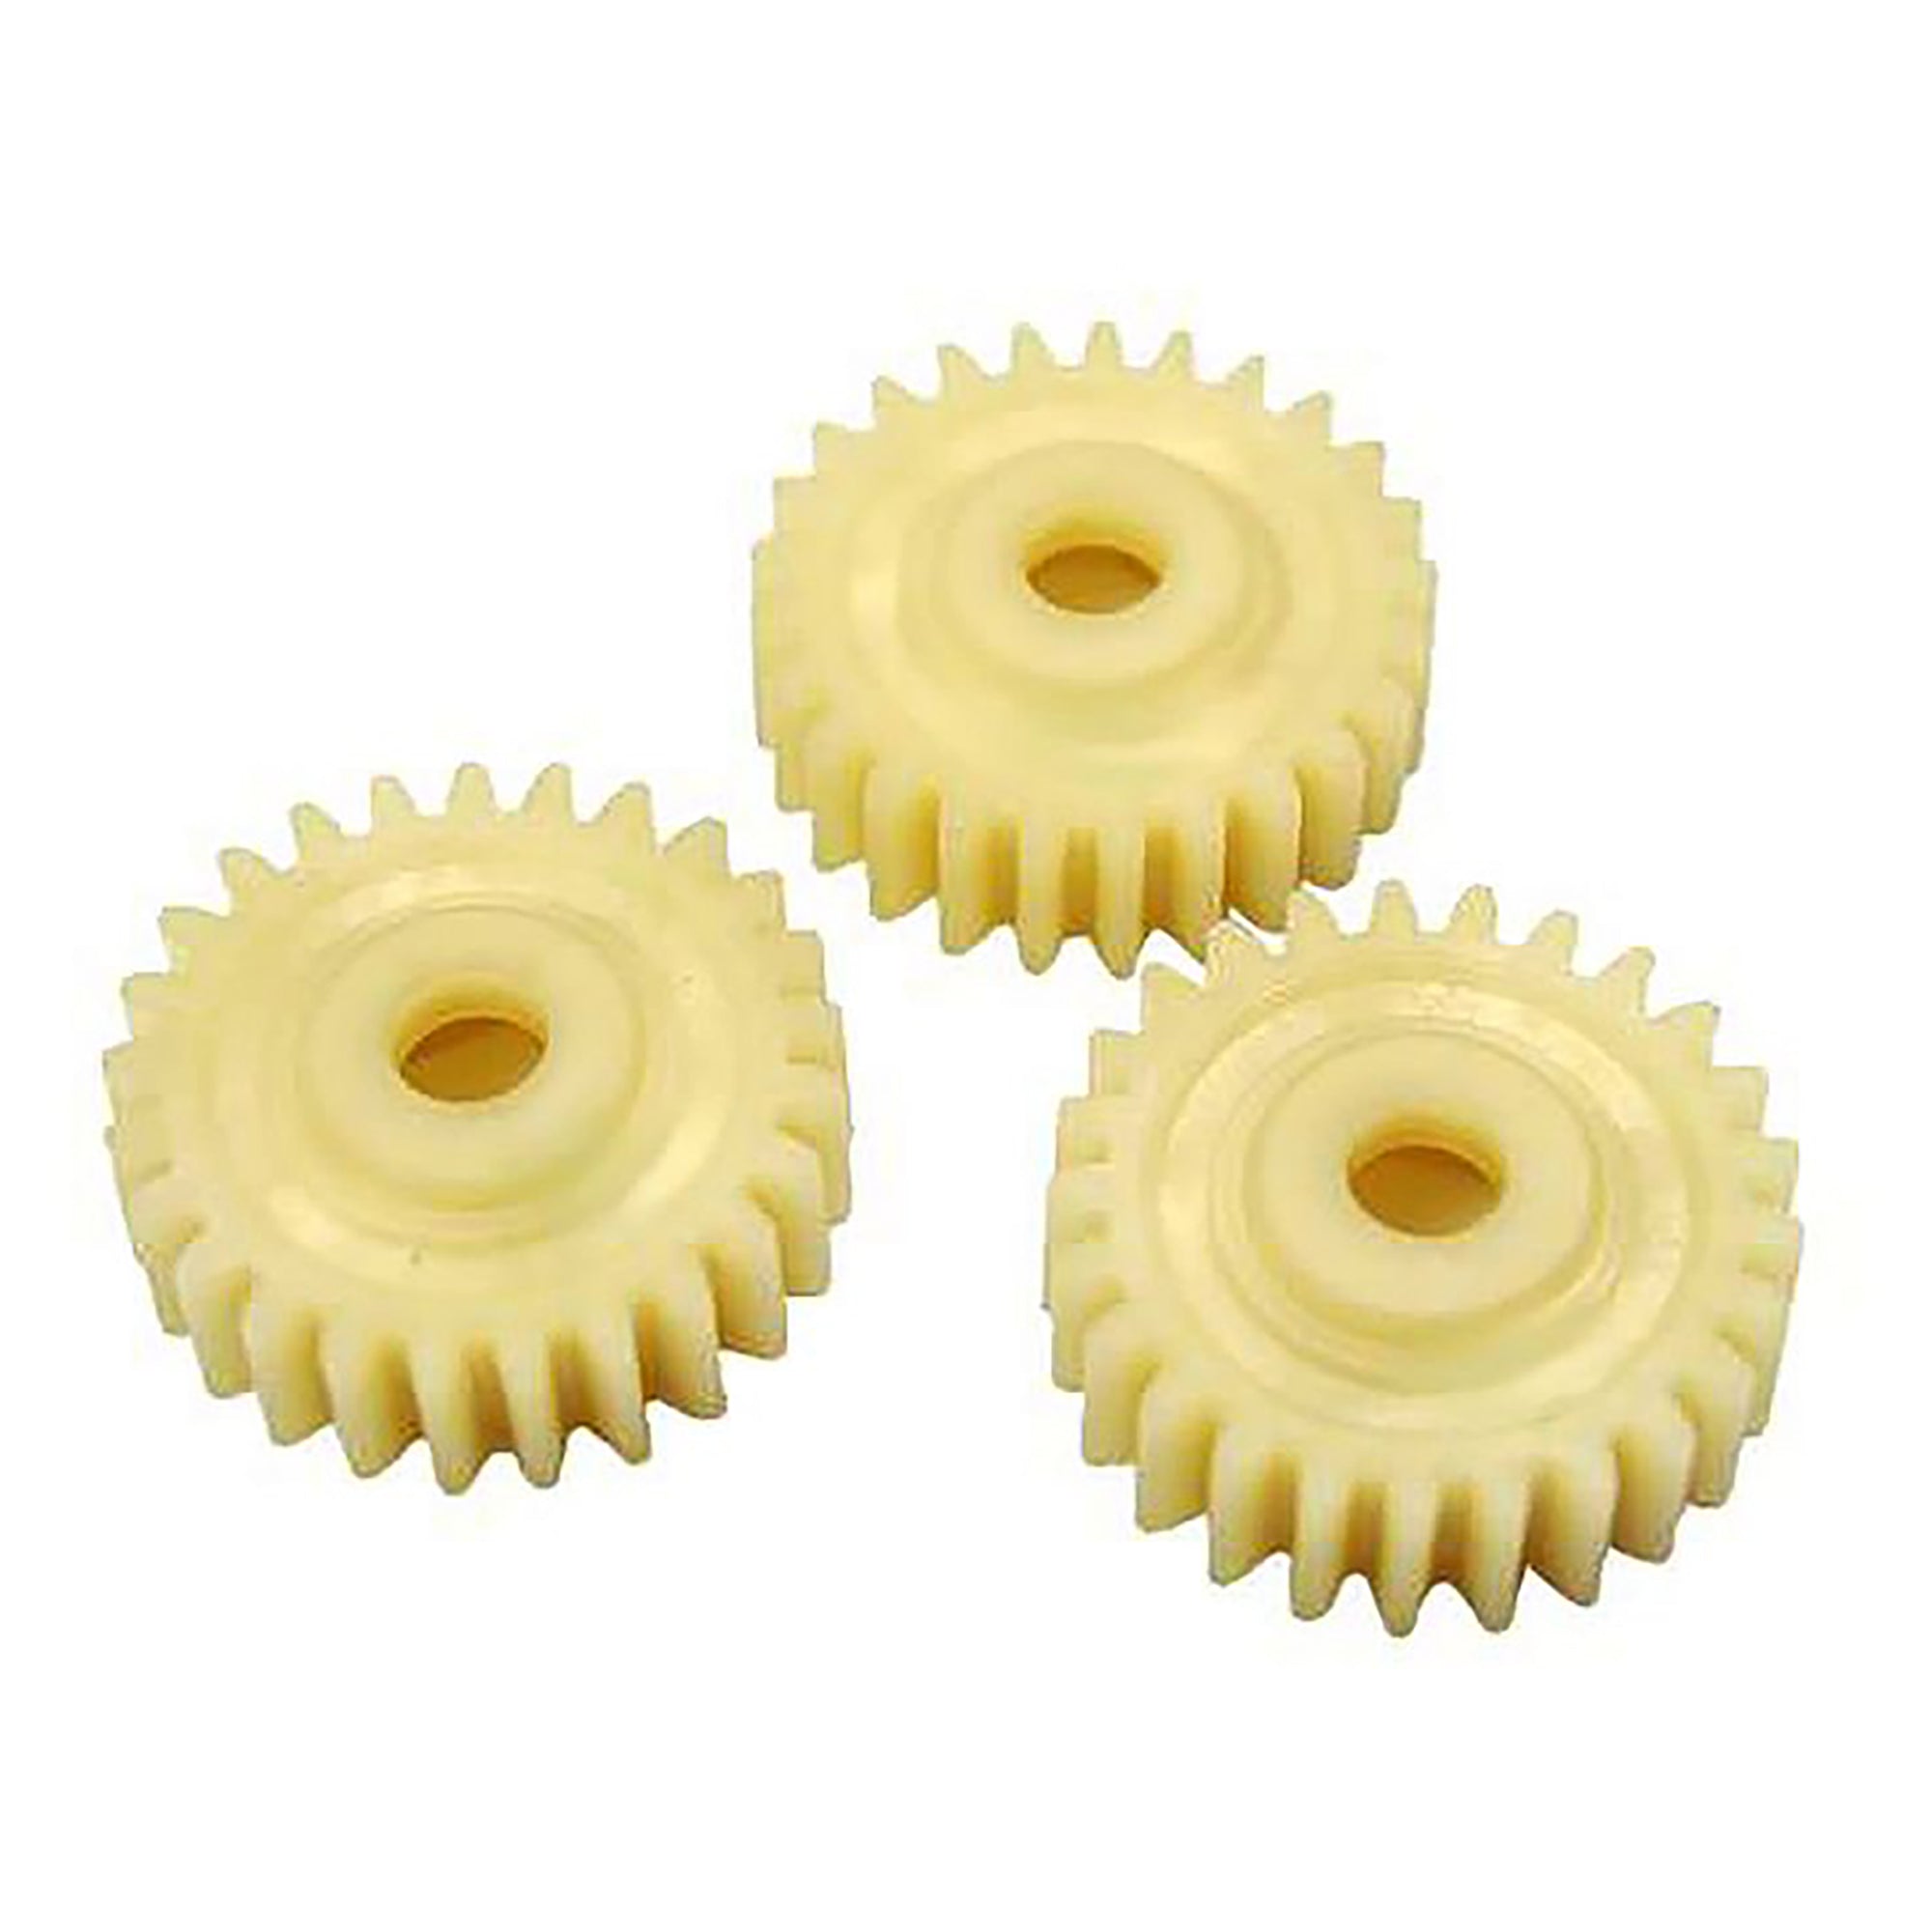 HSP Racing 50116 Diff.Gear(25T) (Pack of 3)